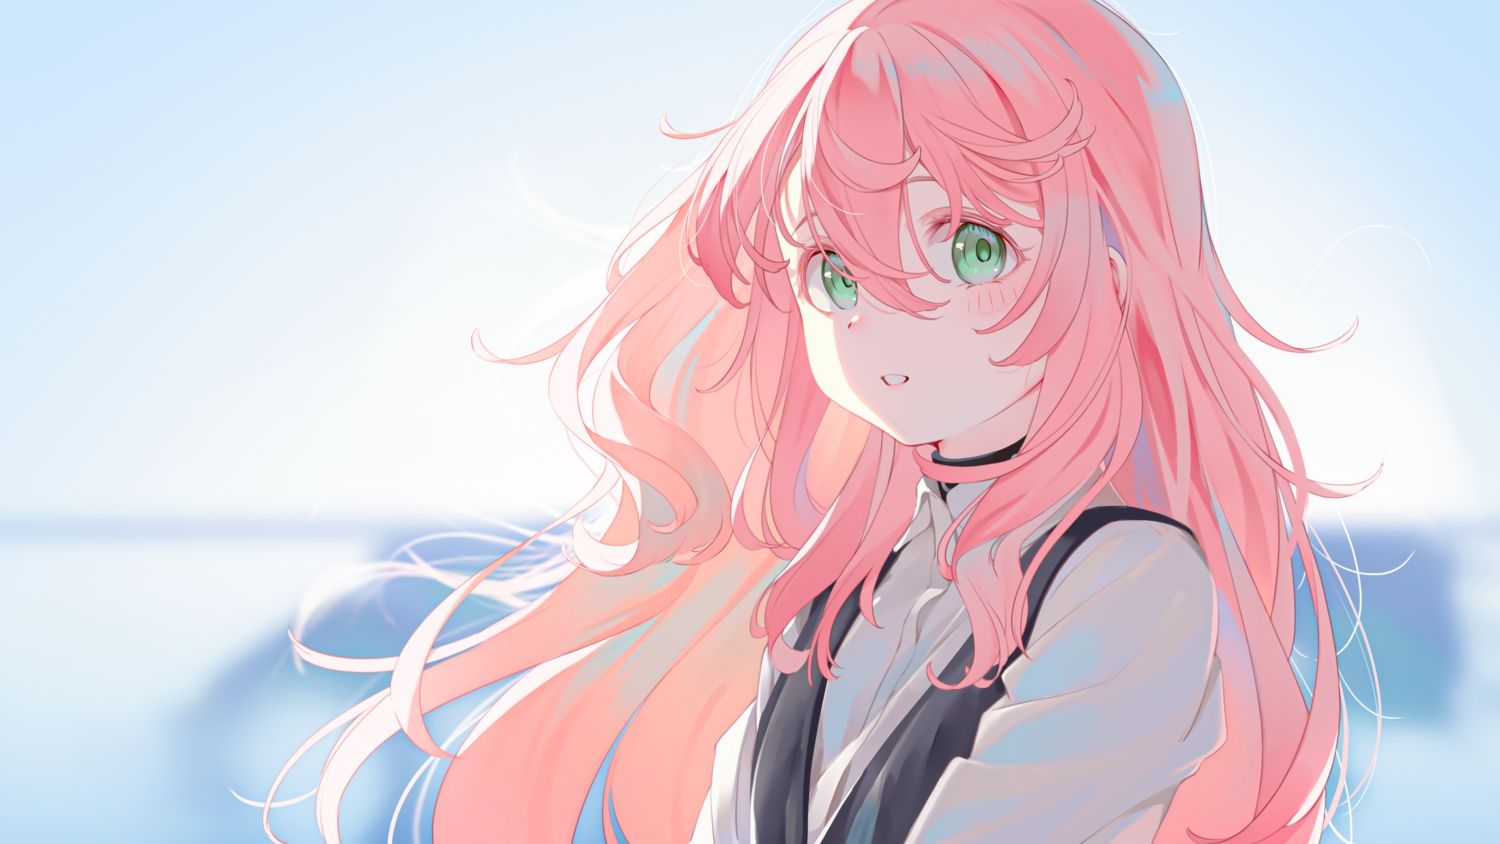 Anime about a girl with pink hair